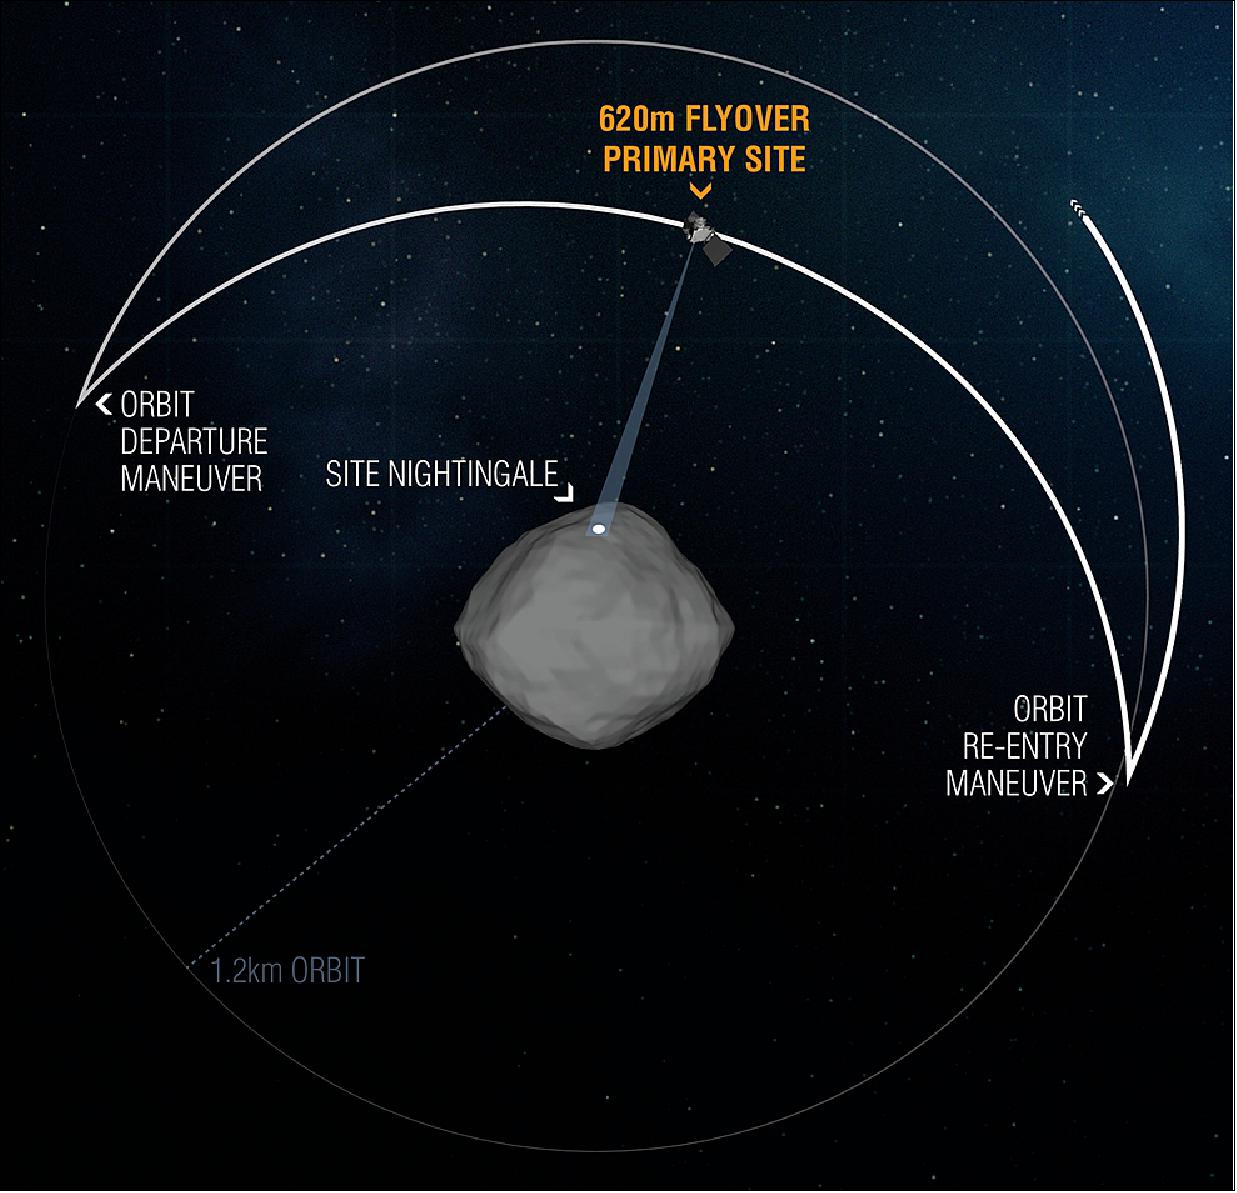 Figure 43: During the OSIRIS-REx Reconnaissance B flyover of primary sample collection site Nightingale, the spacecraft left its safe-home orbit to pass over the sample site at an altitude of 620 m. The pass, which took 11 hours, gave the spacecraft’s onboard instruments the opportunity to take the closest-ever science observations of the sample site (image credit: NASA/Goddard/University of Arizona)